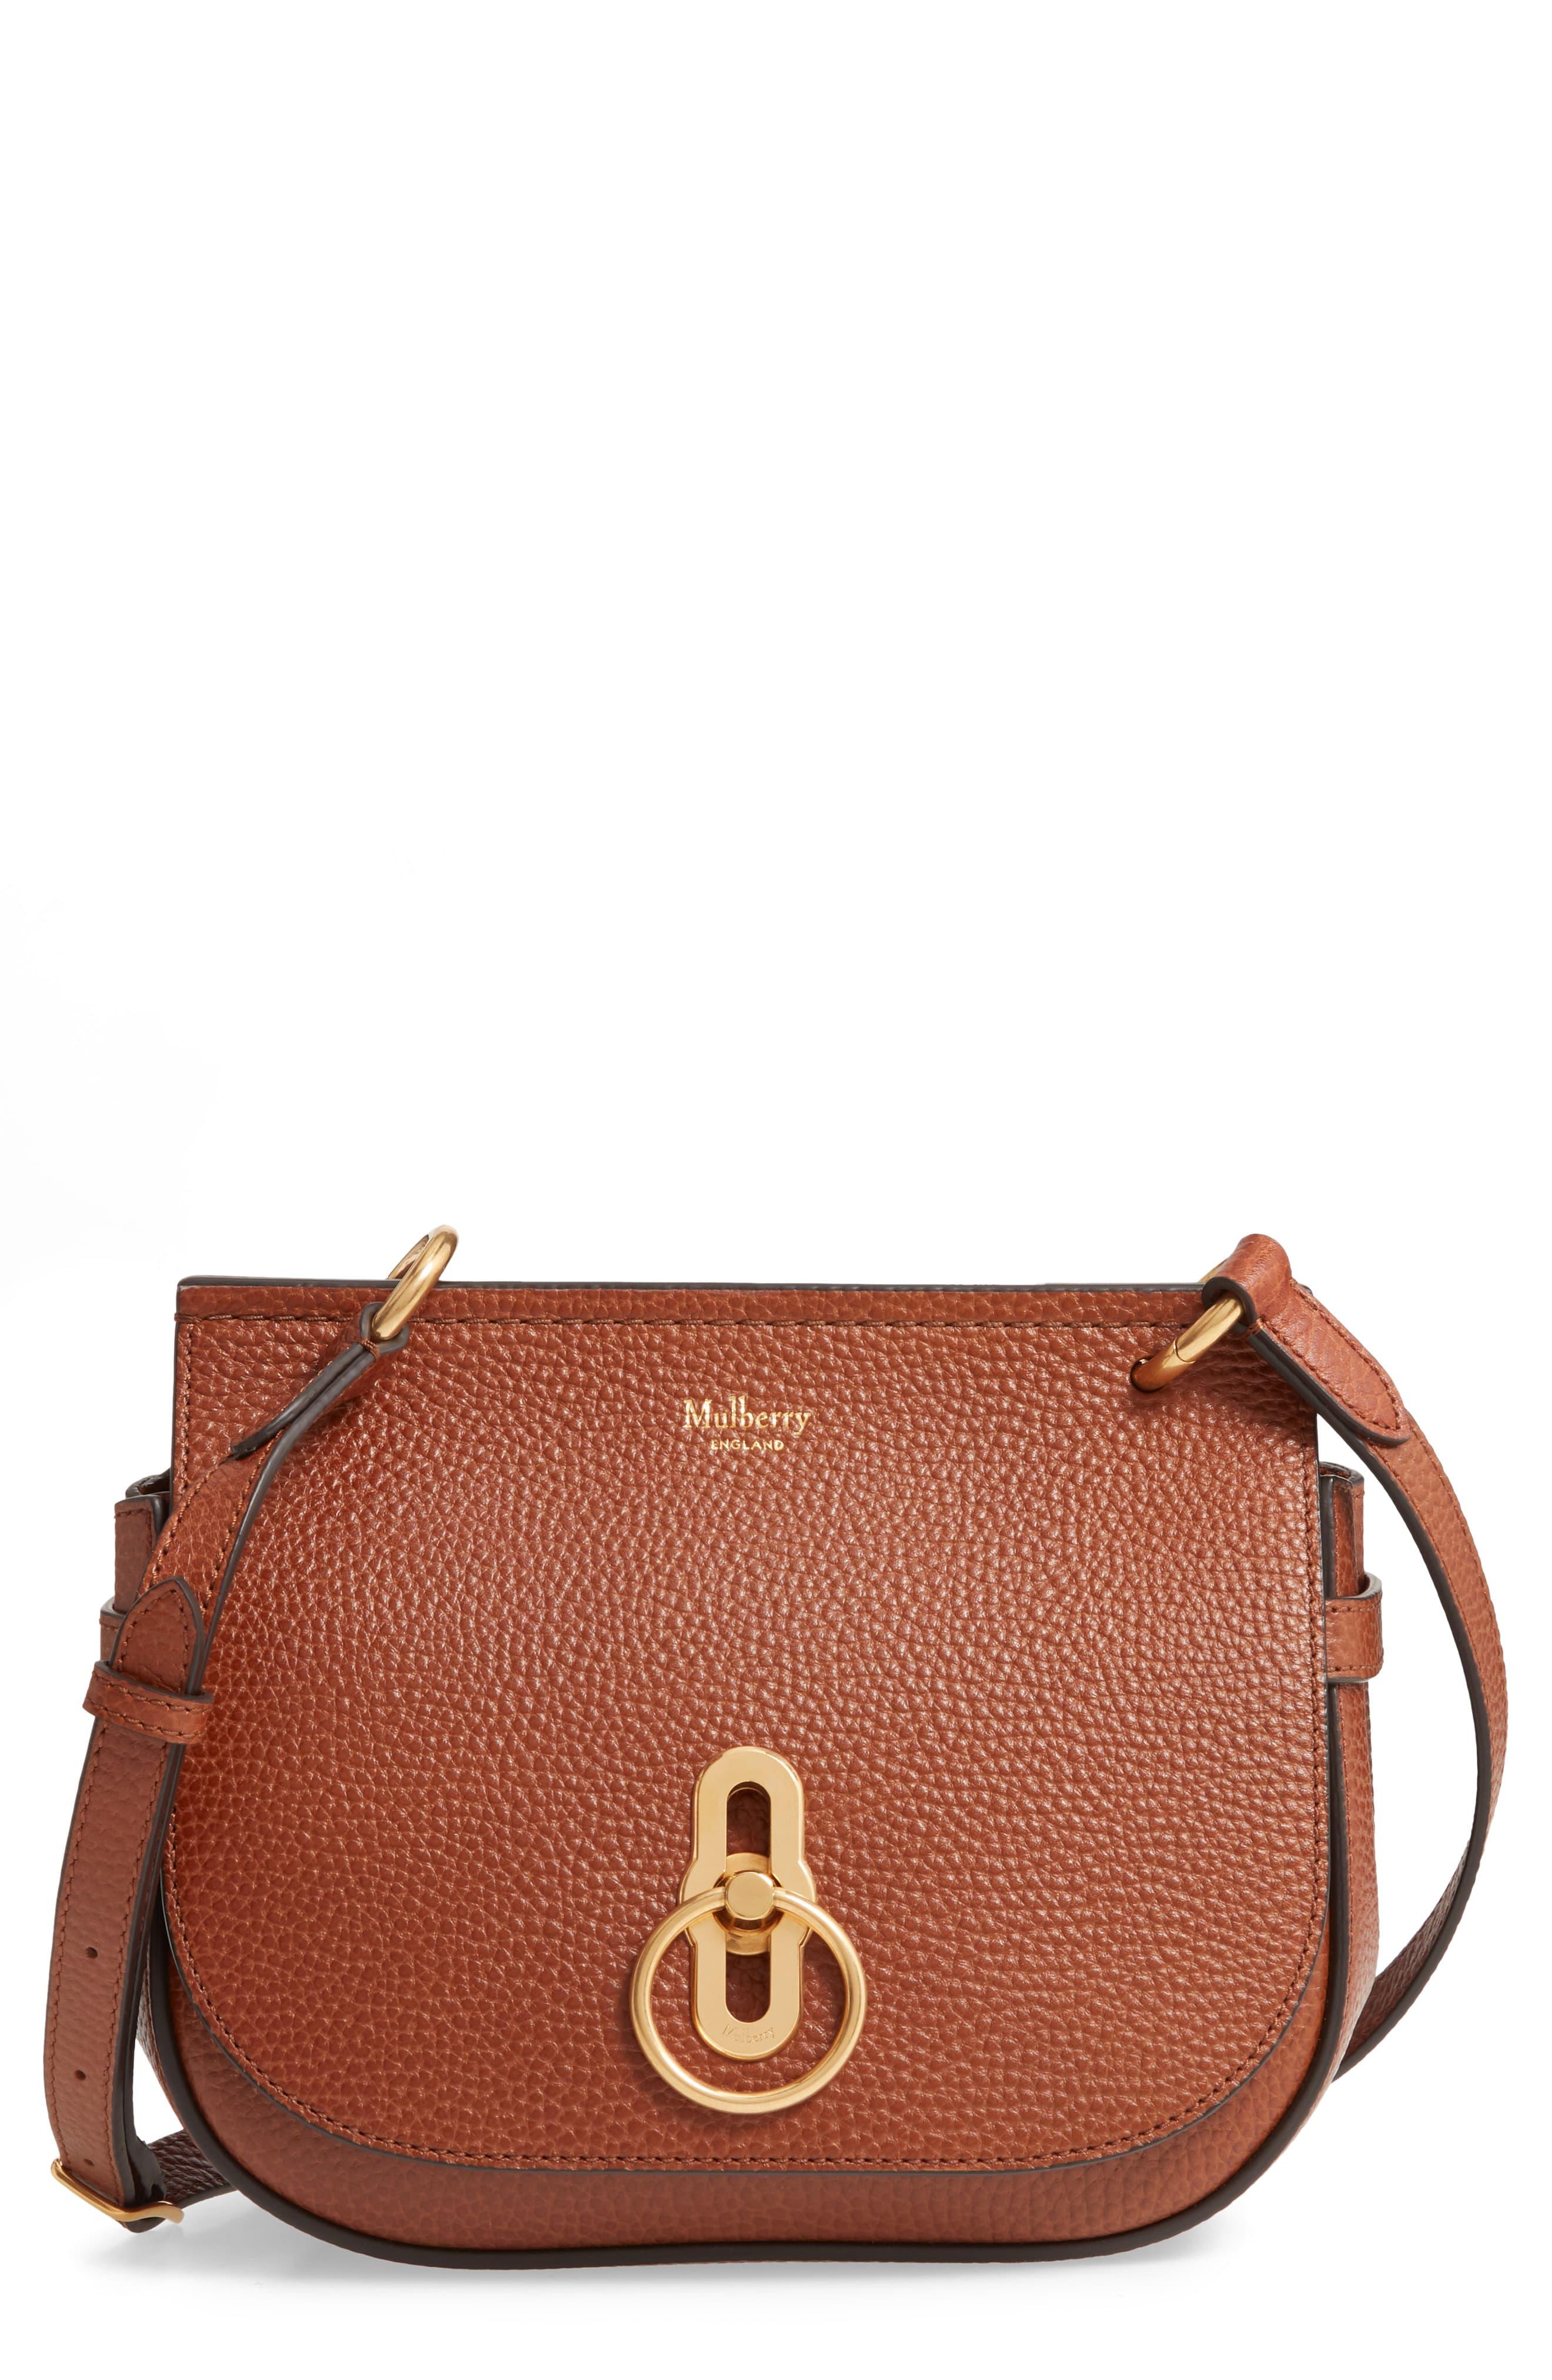 Mulberry Small Amberley Leather Crossbody Saddle Bag in Brown - Save 15 ...